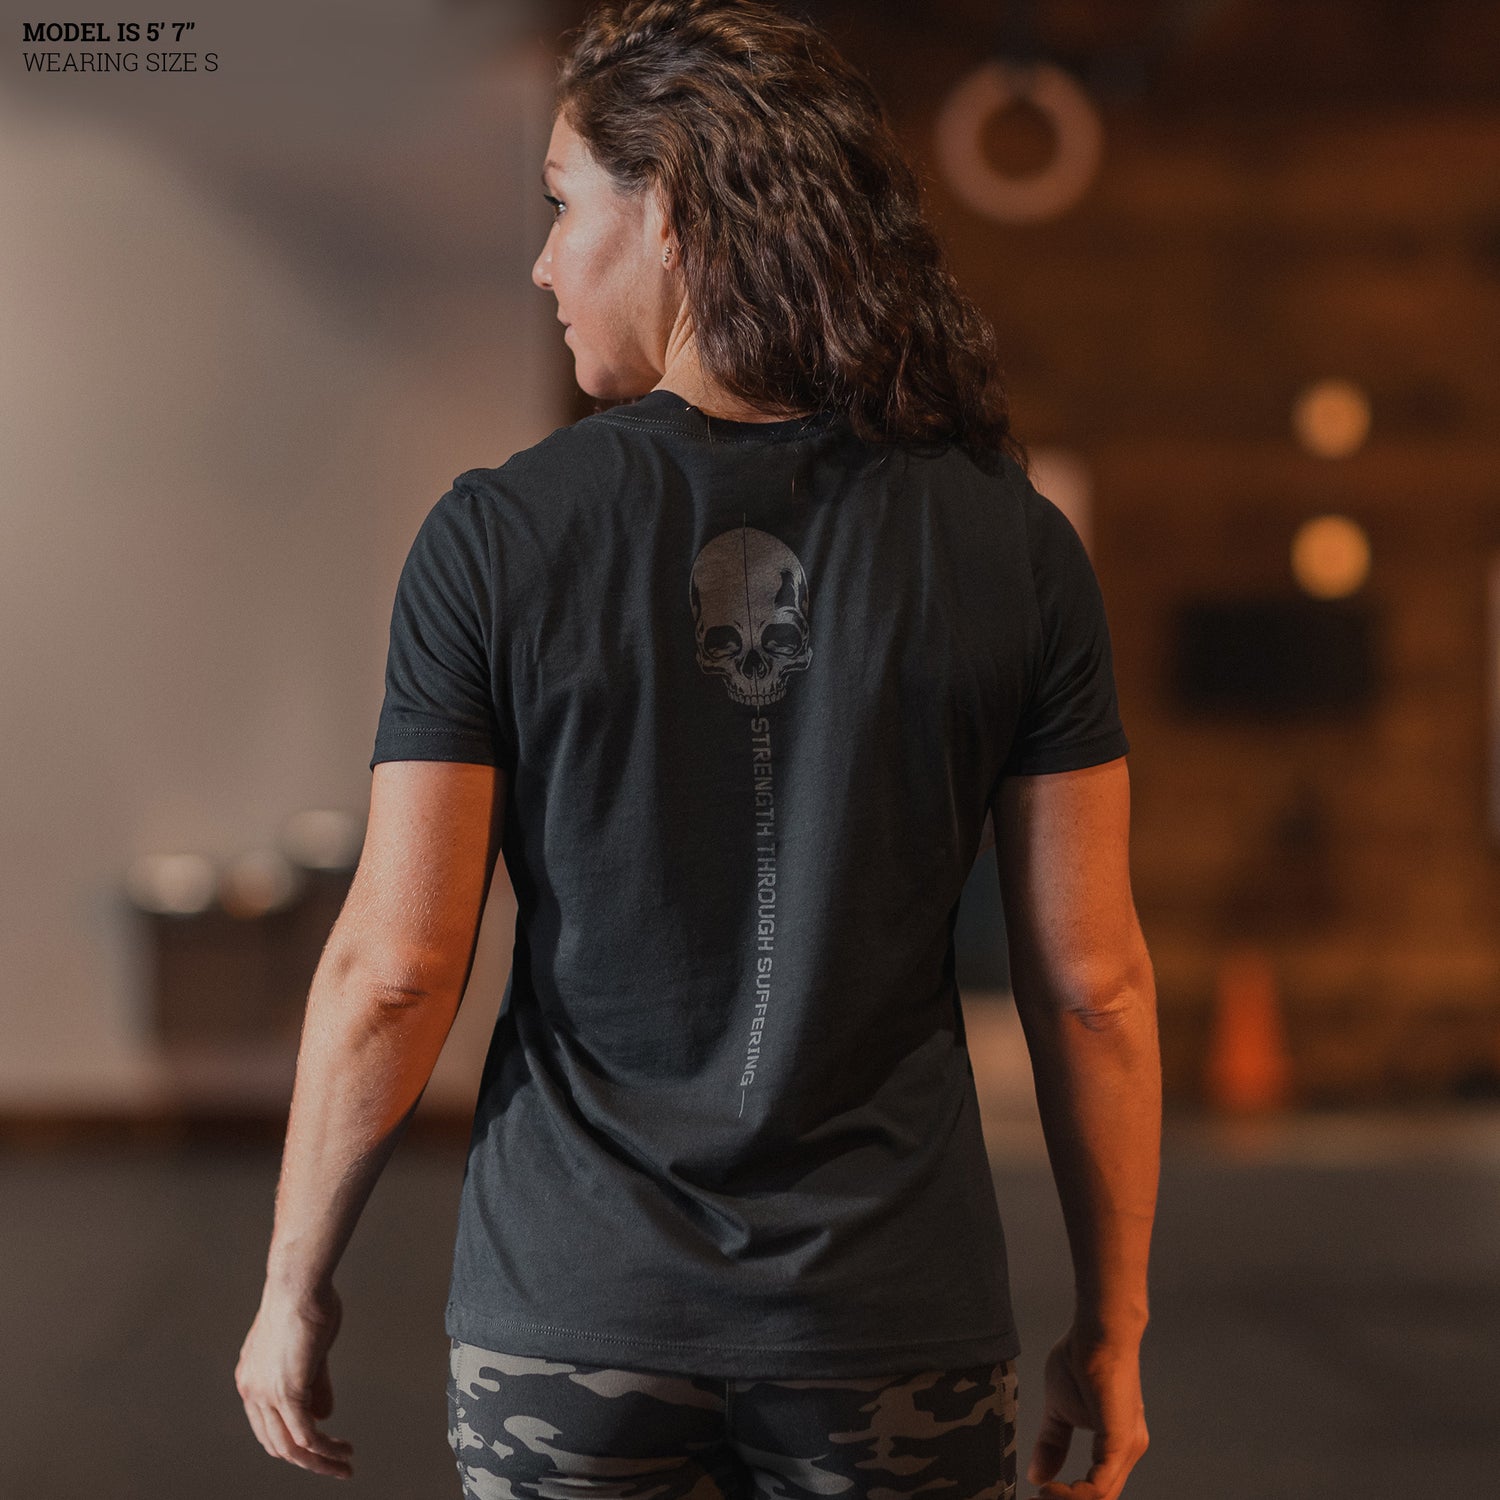 Patriotic Gym Tops for Women - Strength Through Suffering 